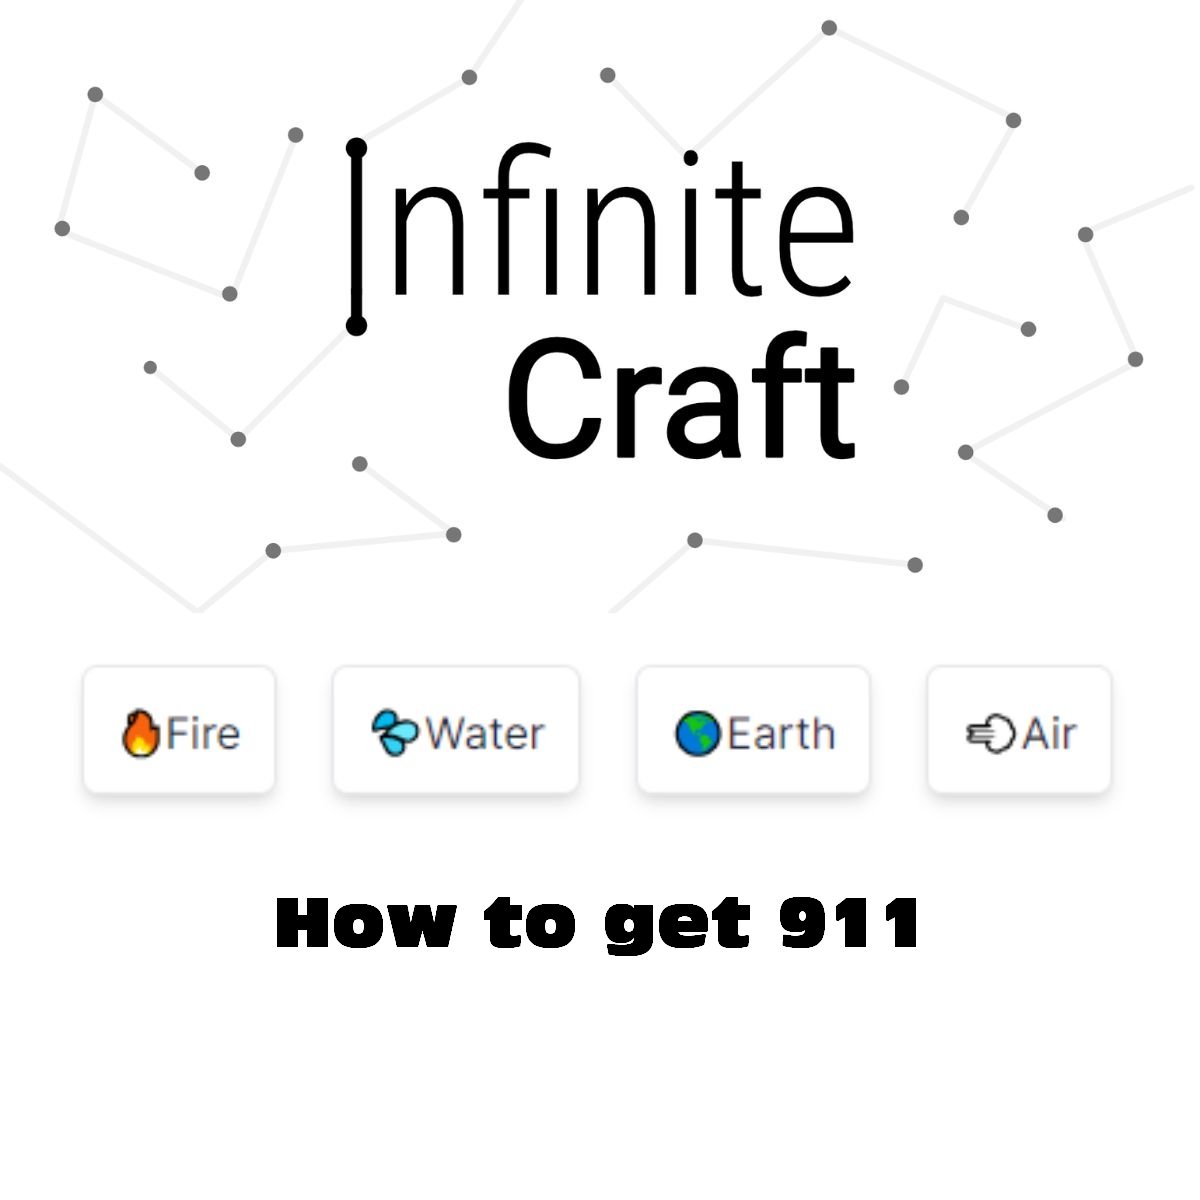 how to get 911 in infinite craft